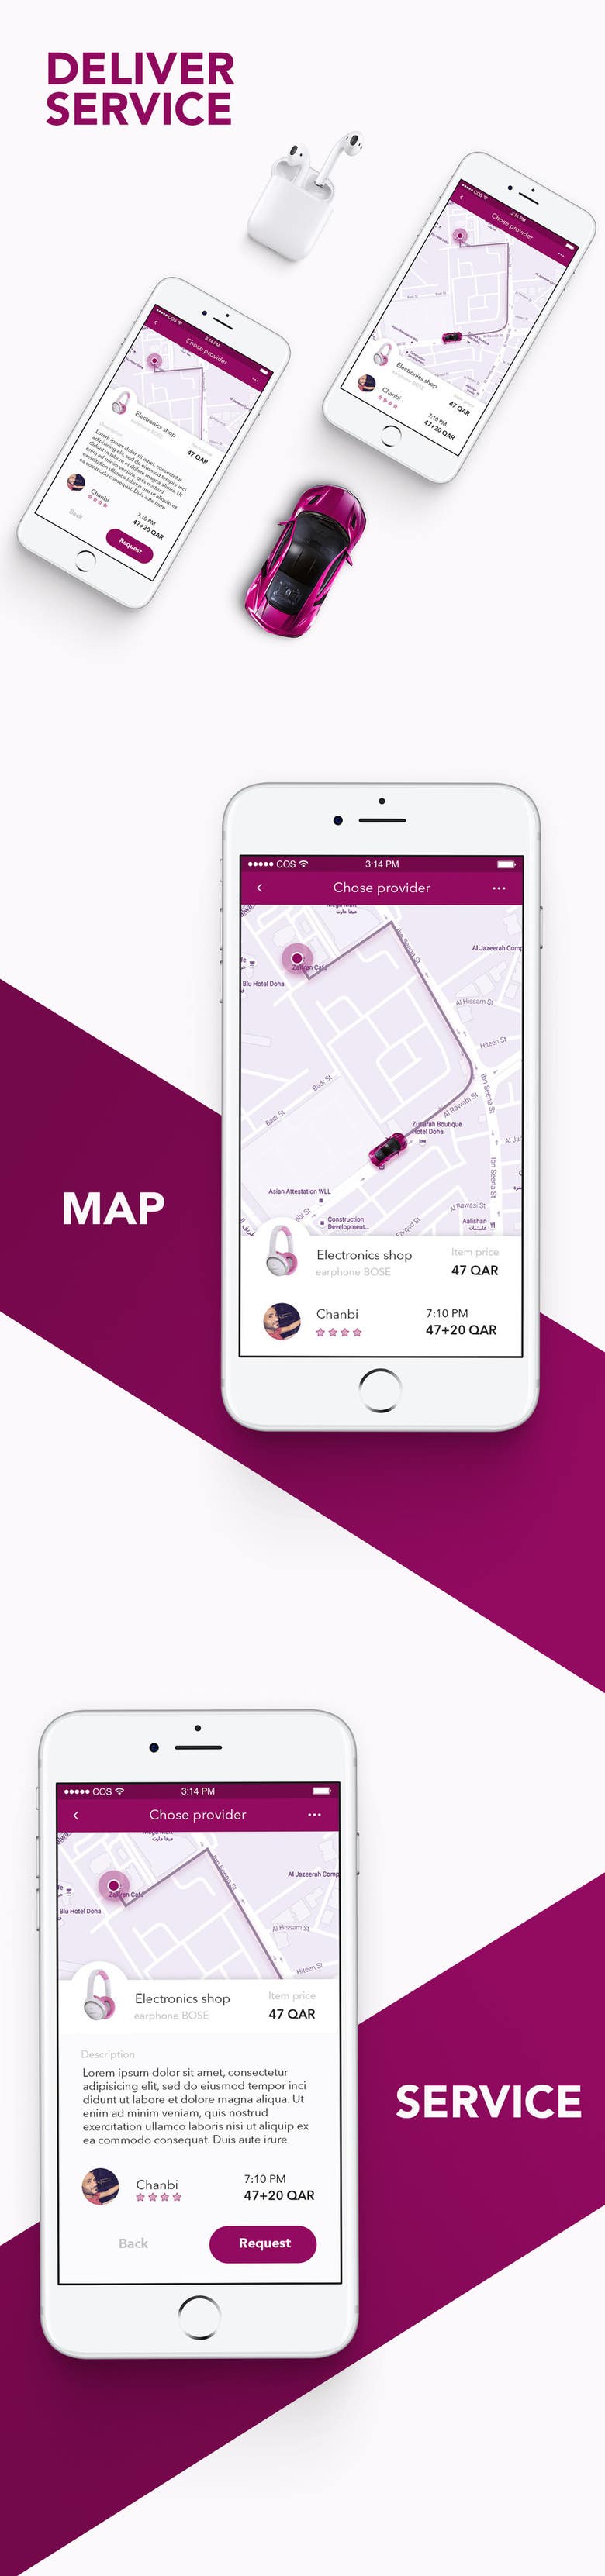 Design screens for delivery service app